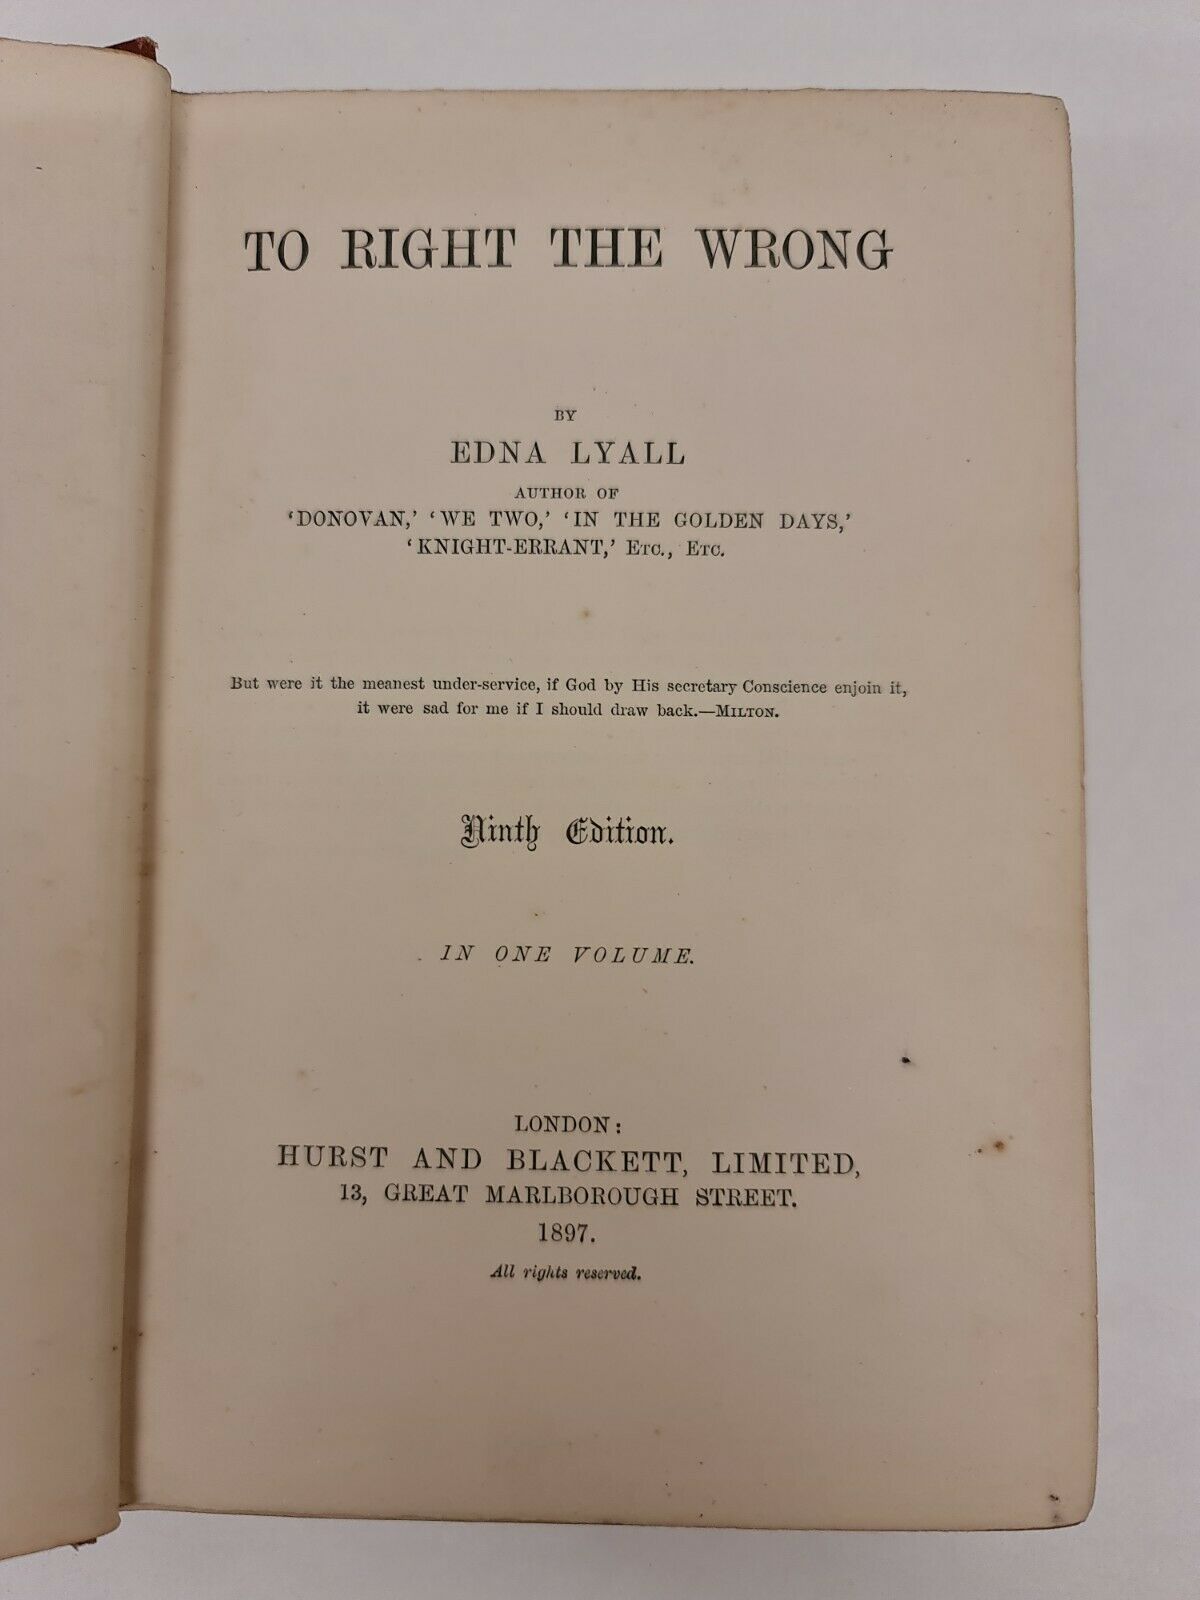 To Right The Wrong by Edna Lyall (1897)